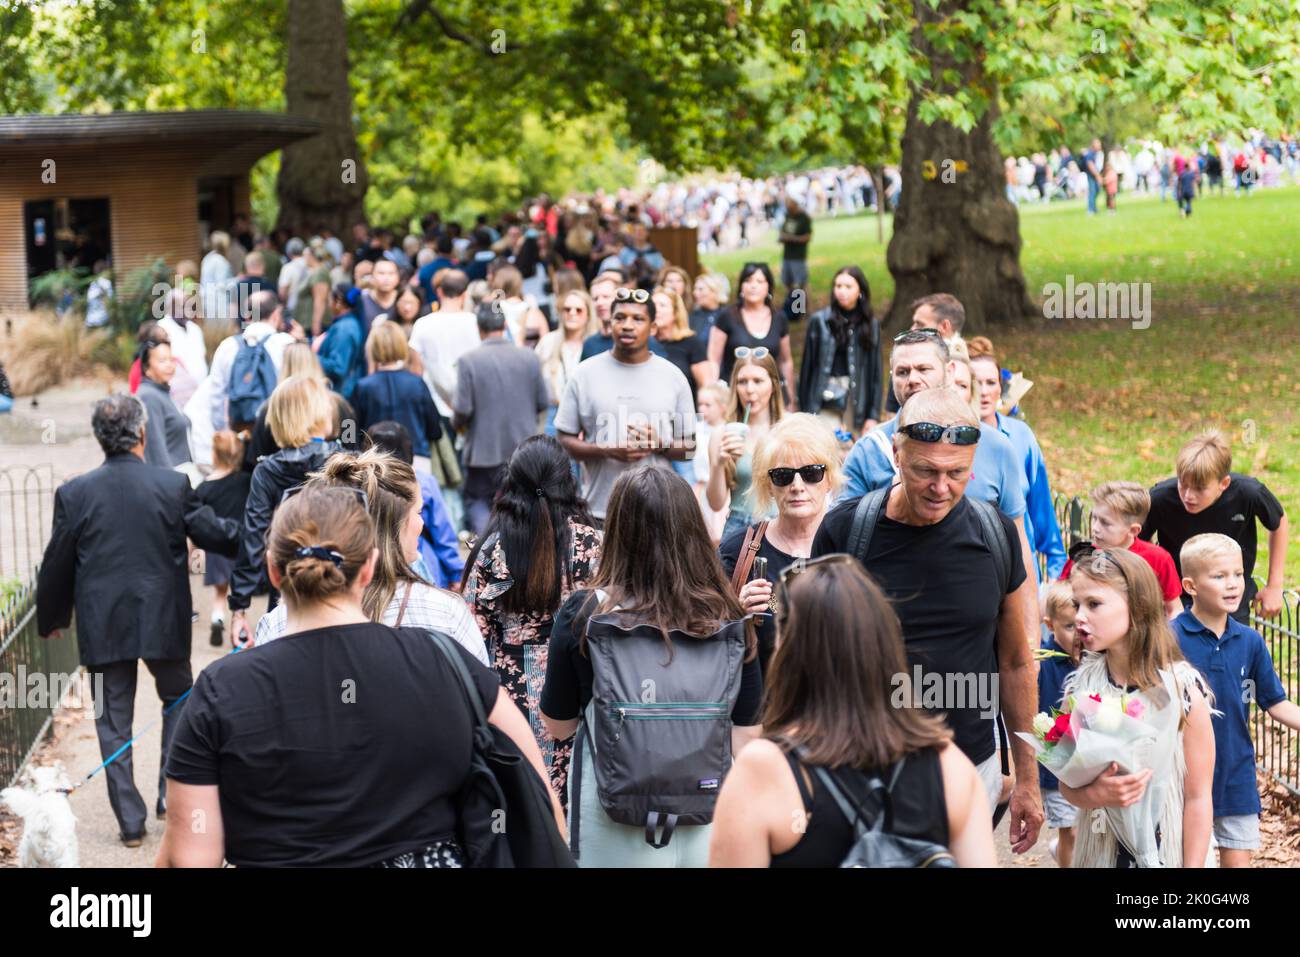 Large crowds in London Buckingham Palace and nearby parks Stock Photo